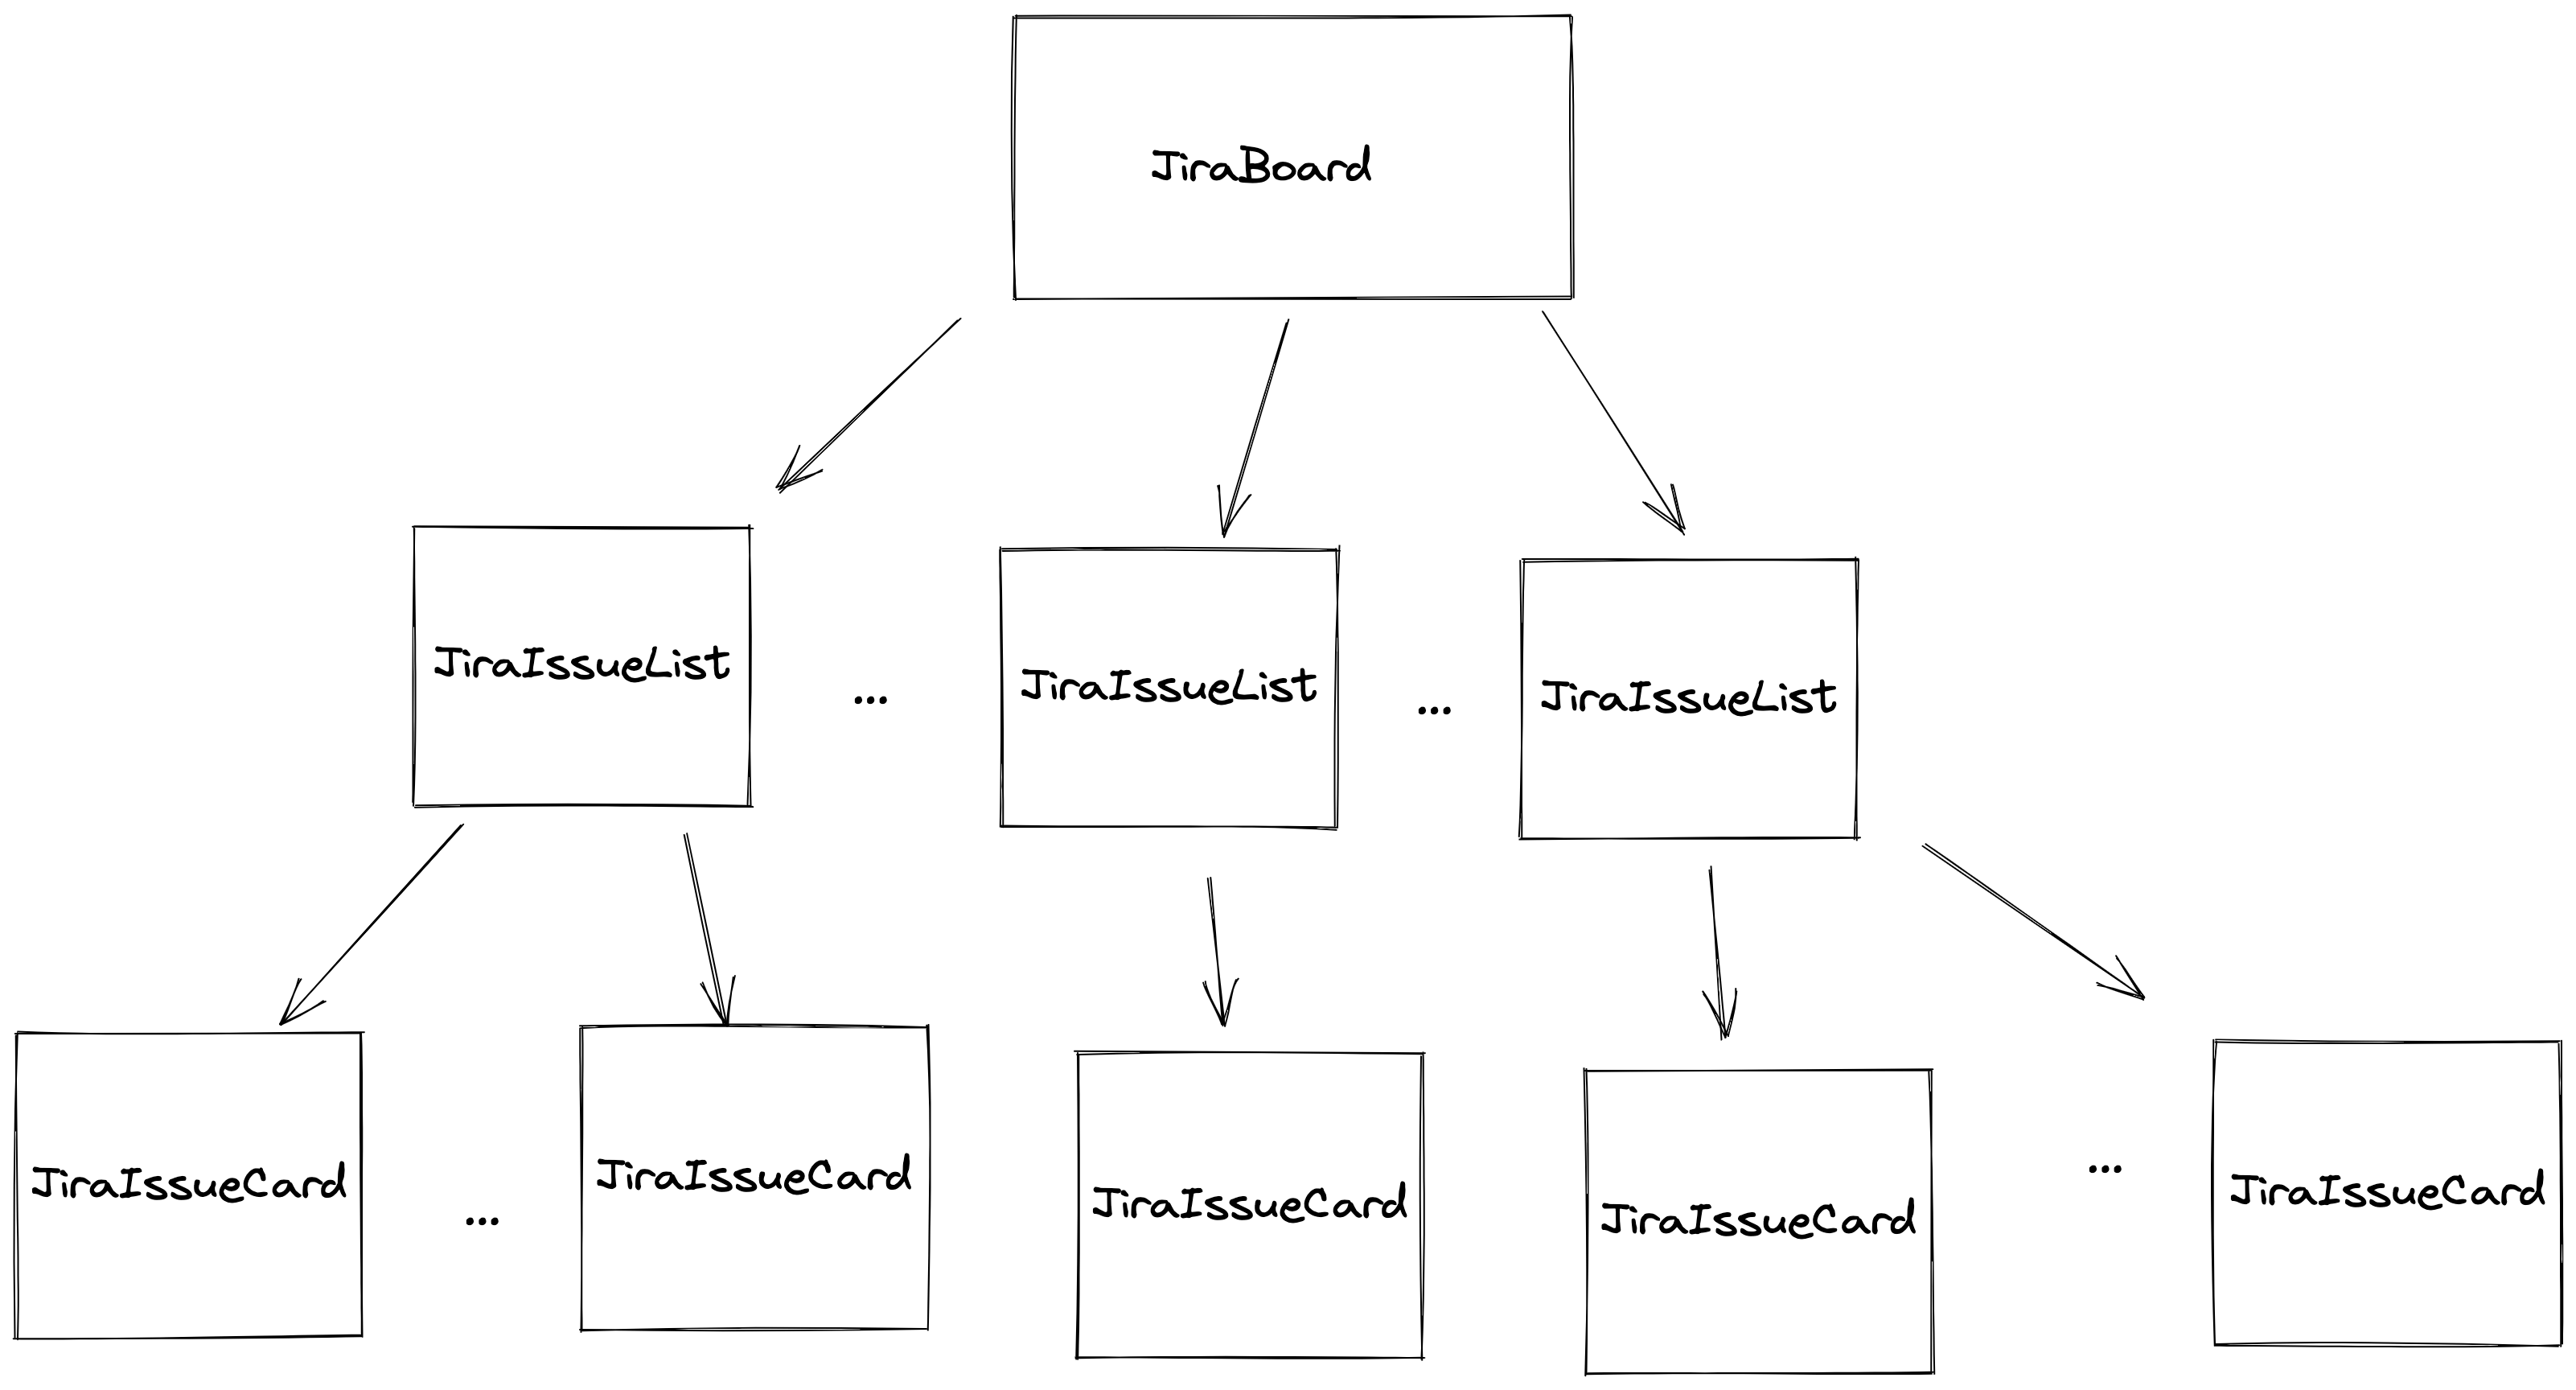 JIRA COMPONENT HIERARCHY TREE